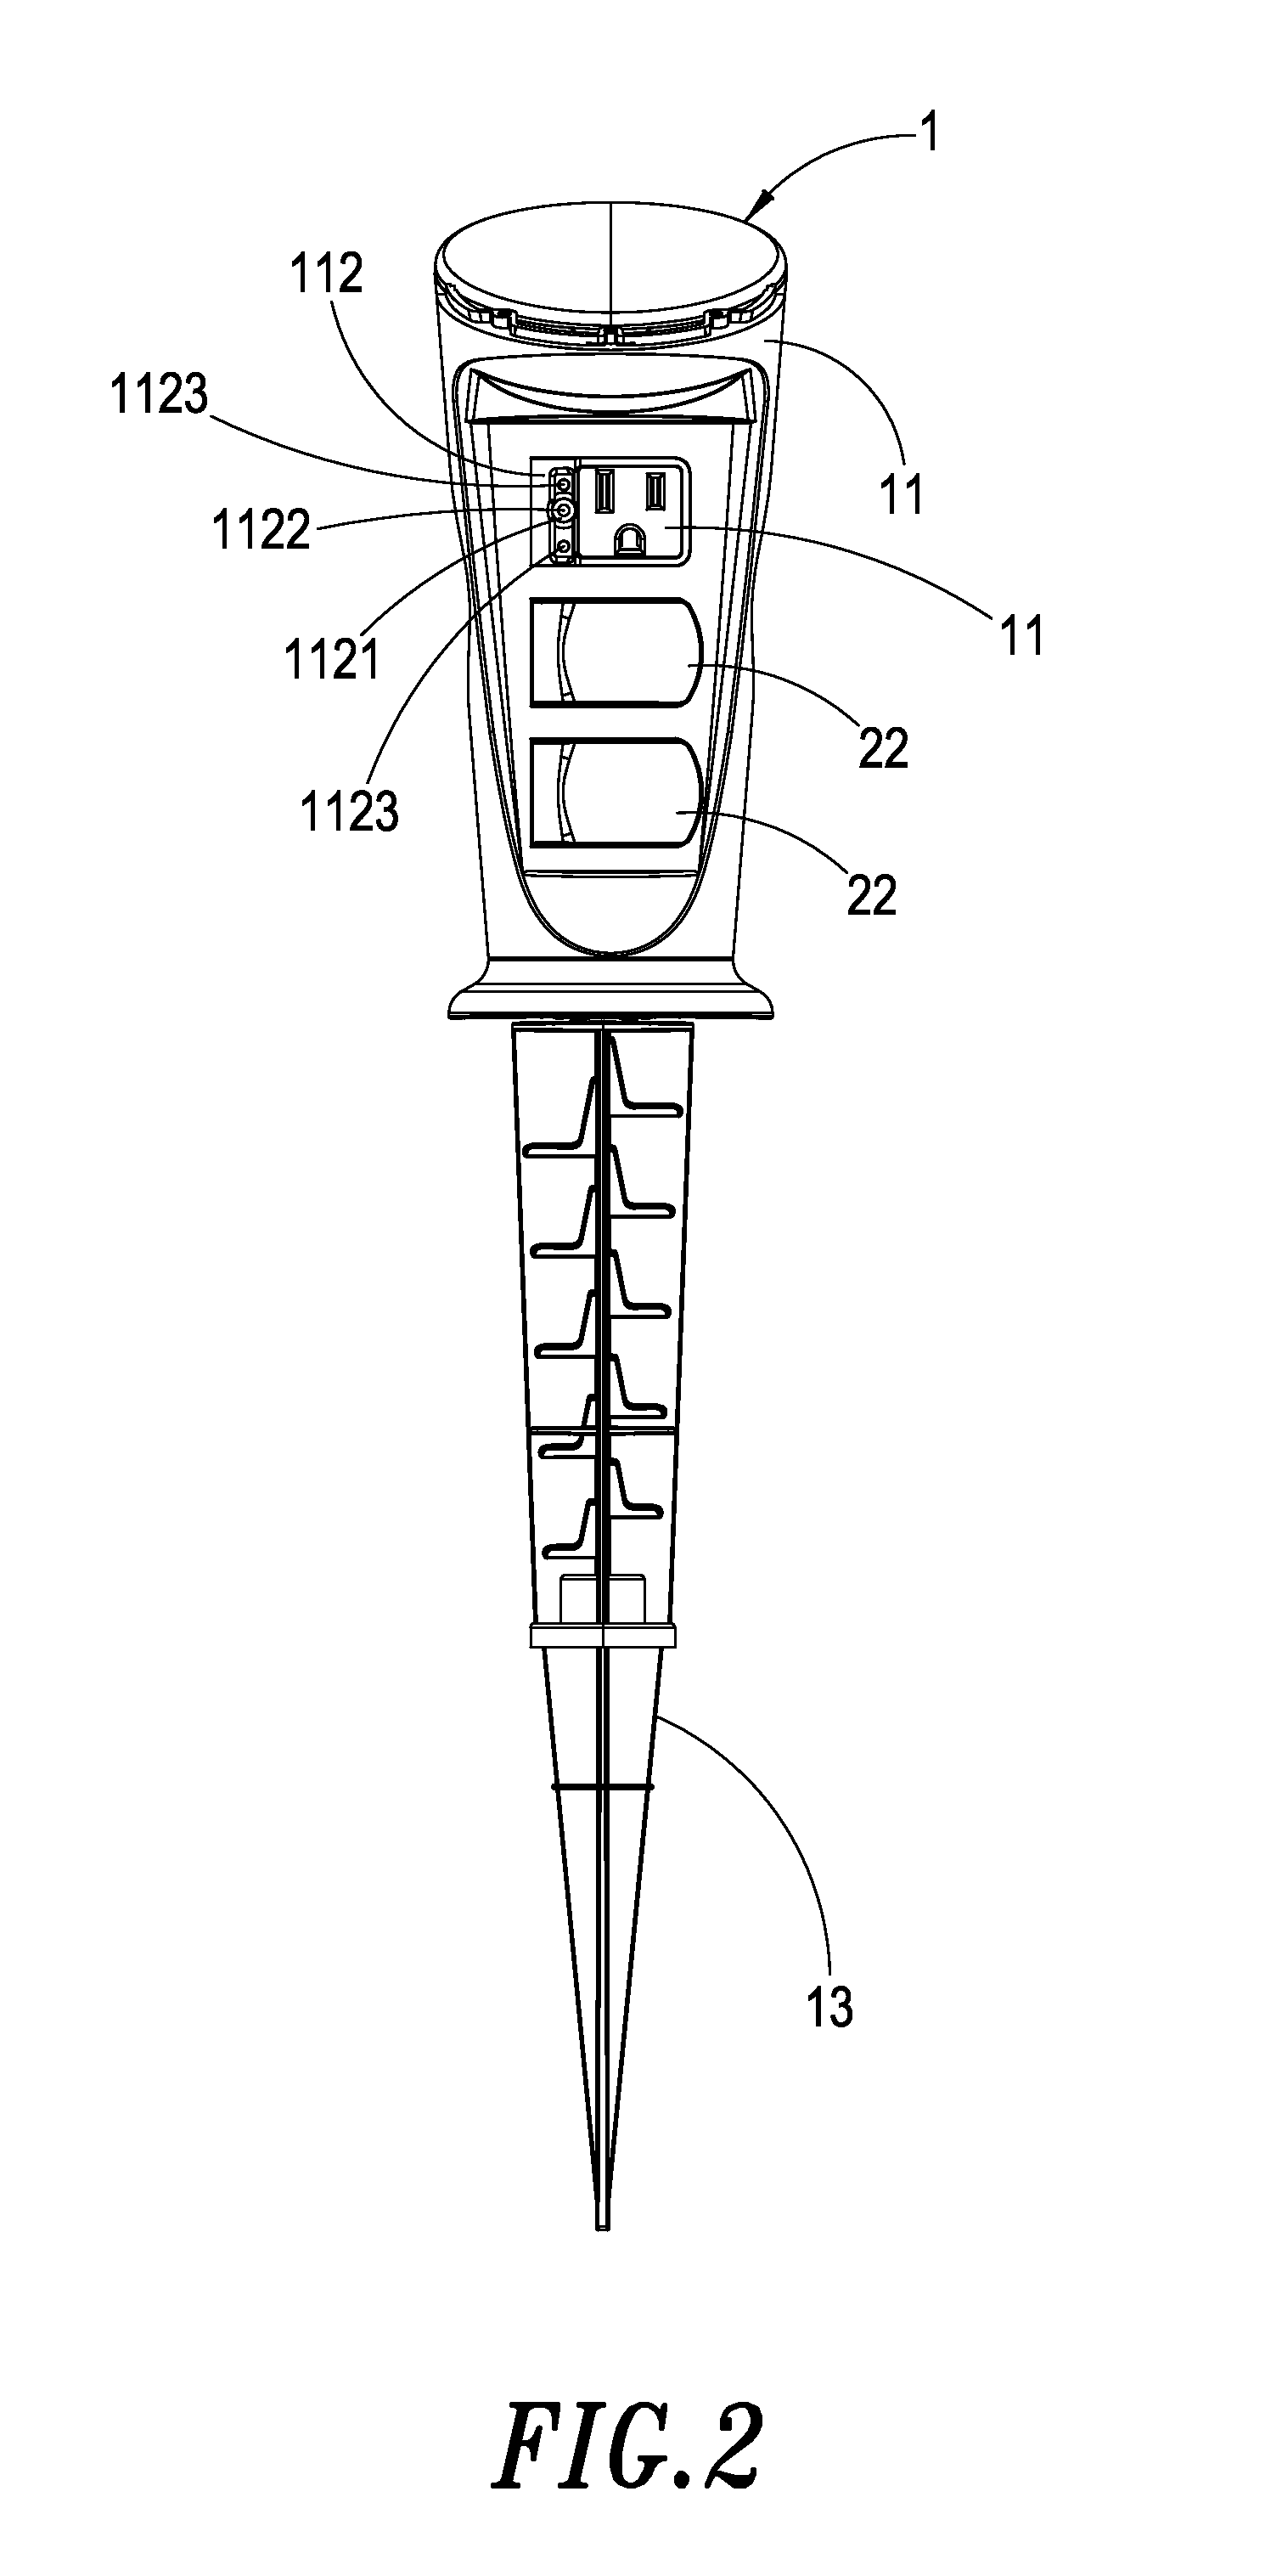 Outdoor power socket having a recessed part to accommodate a connection element for attaching a protective lid